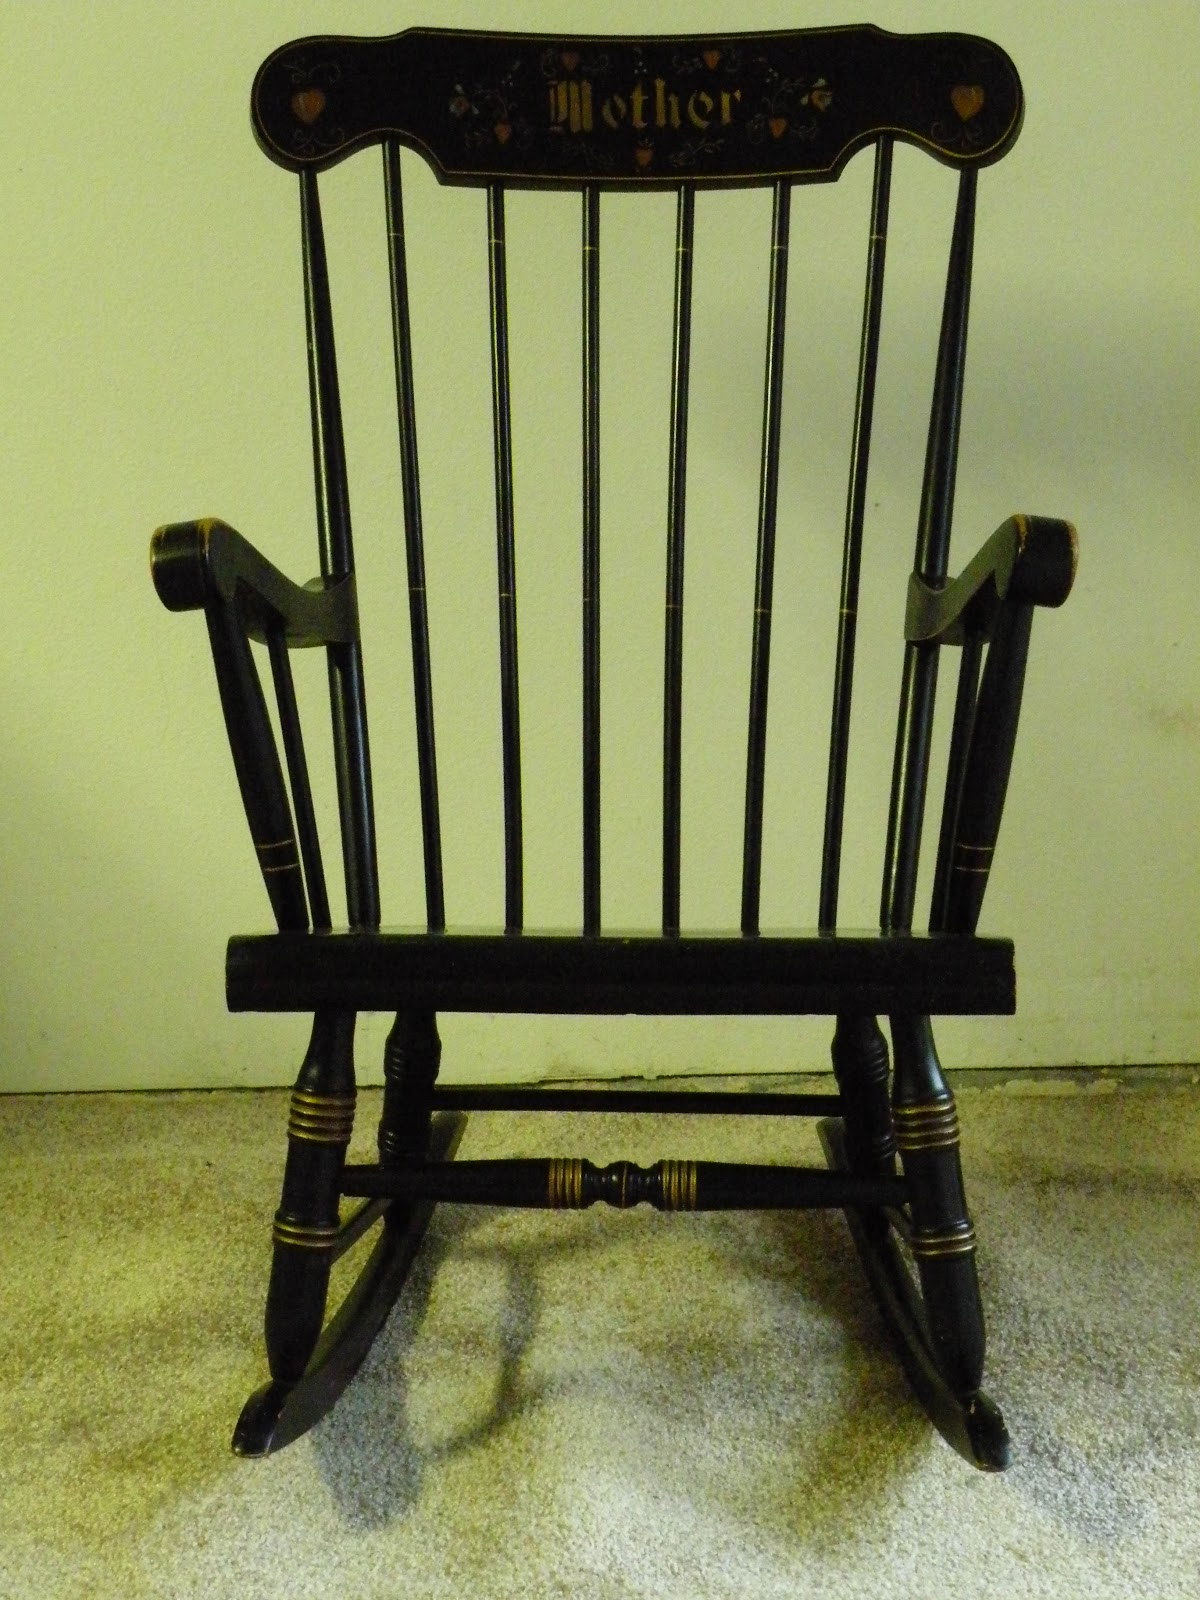 Jim's Vintage: An Almost Antique Black Rocking Chair "Mother"